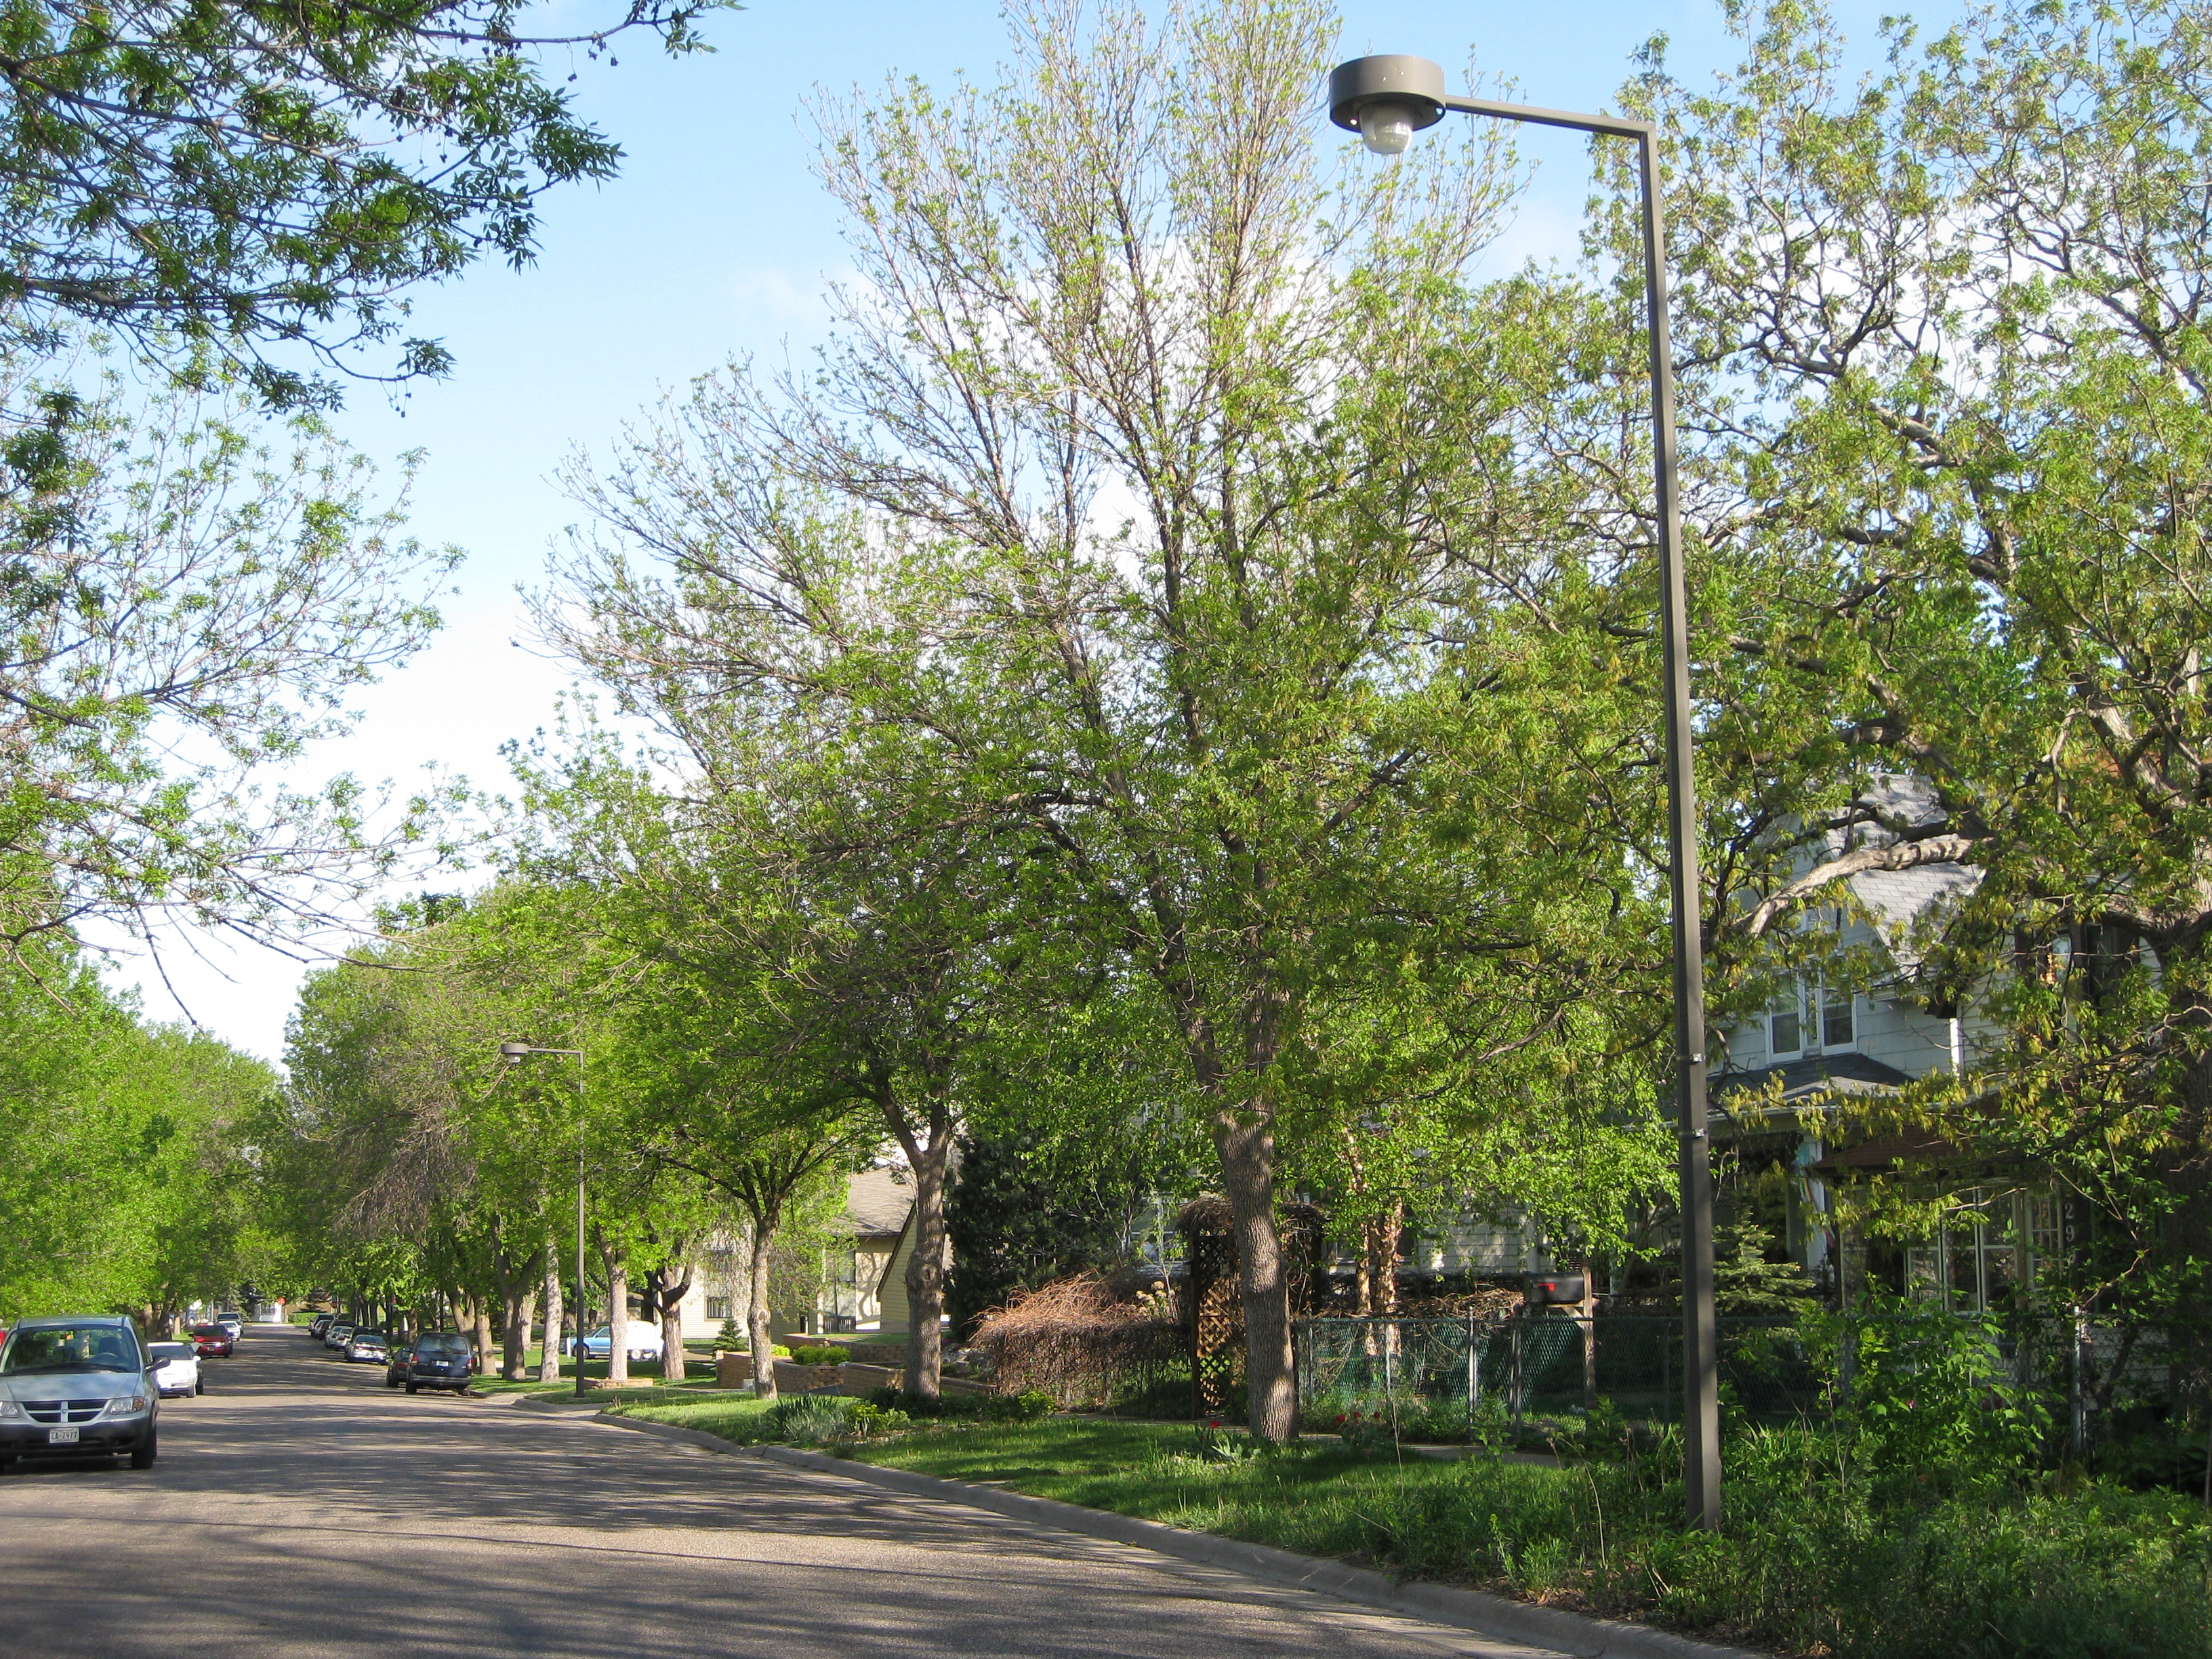 St. Paul street lined with infested ash trees